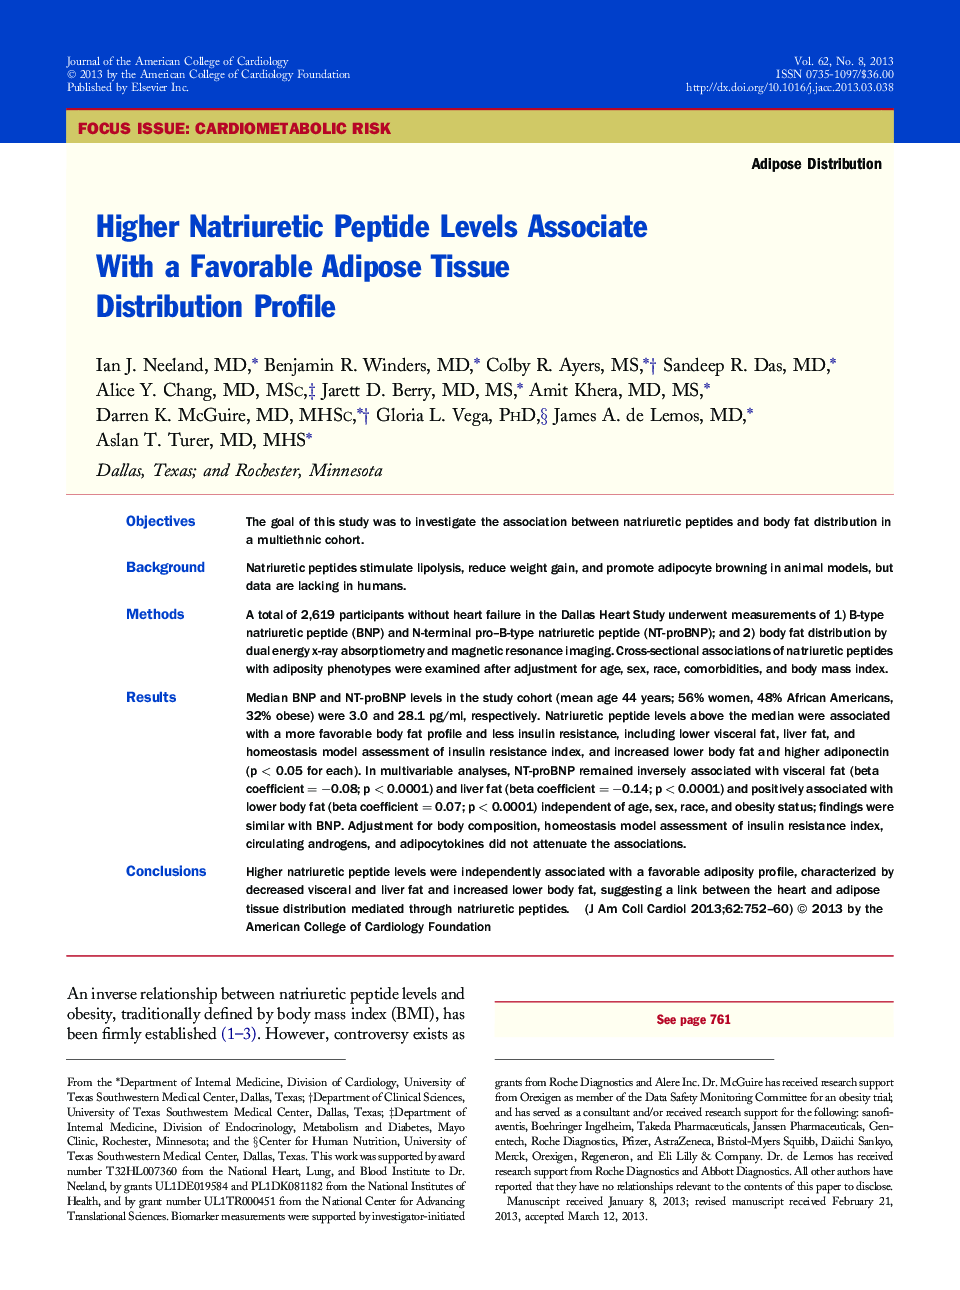 Higher Natriuretic Peptide Levels Associate With a Favorable Adipose Tissue Distribution Profile 